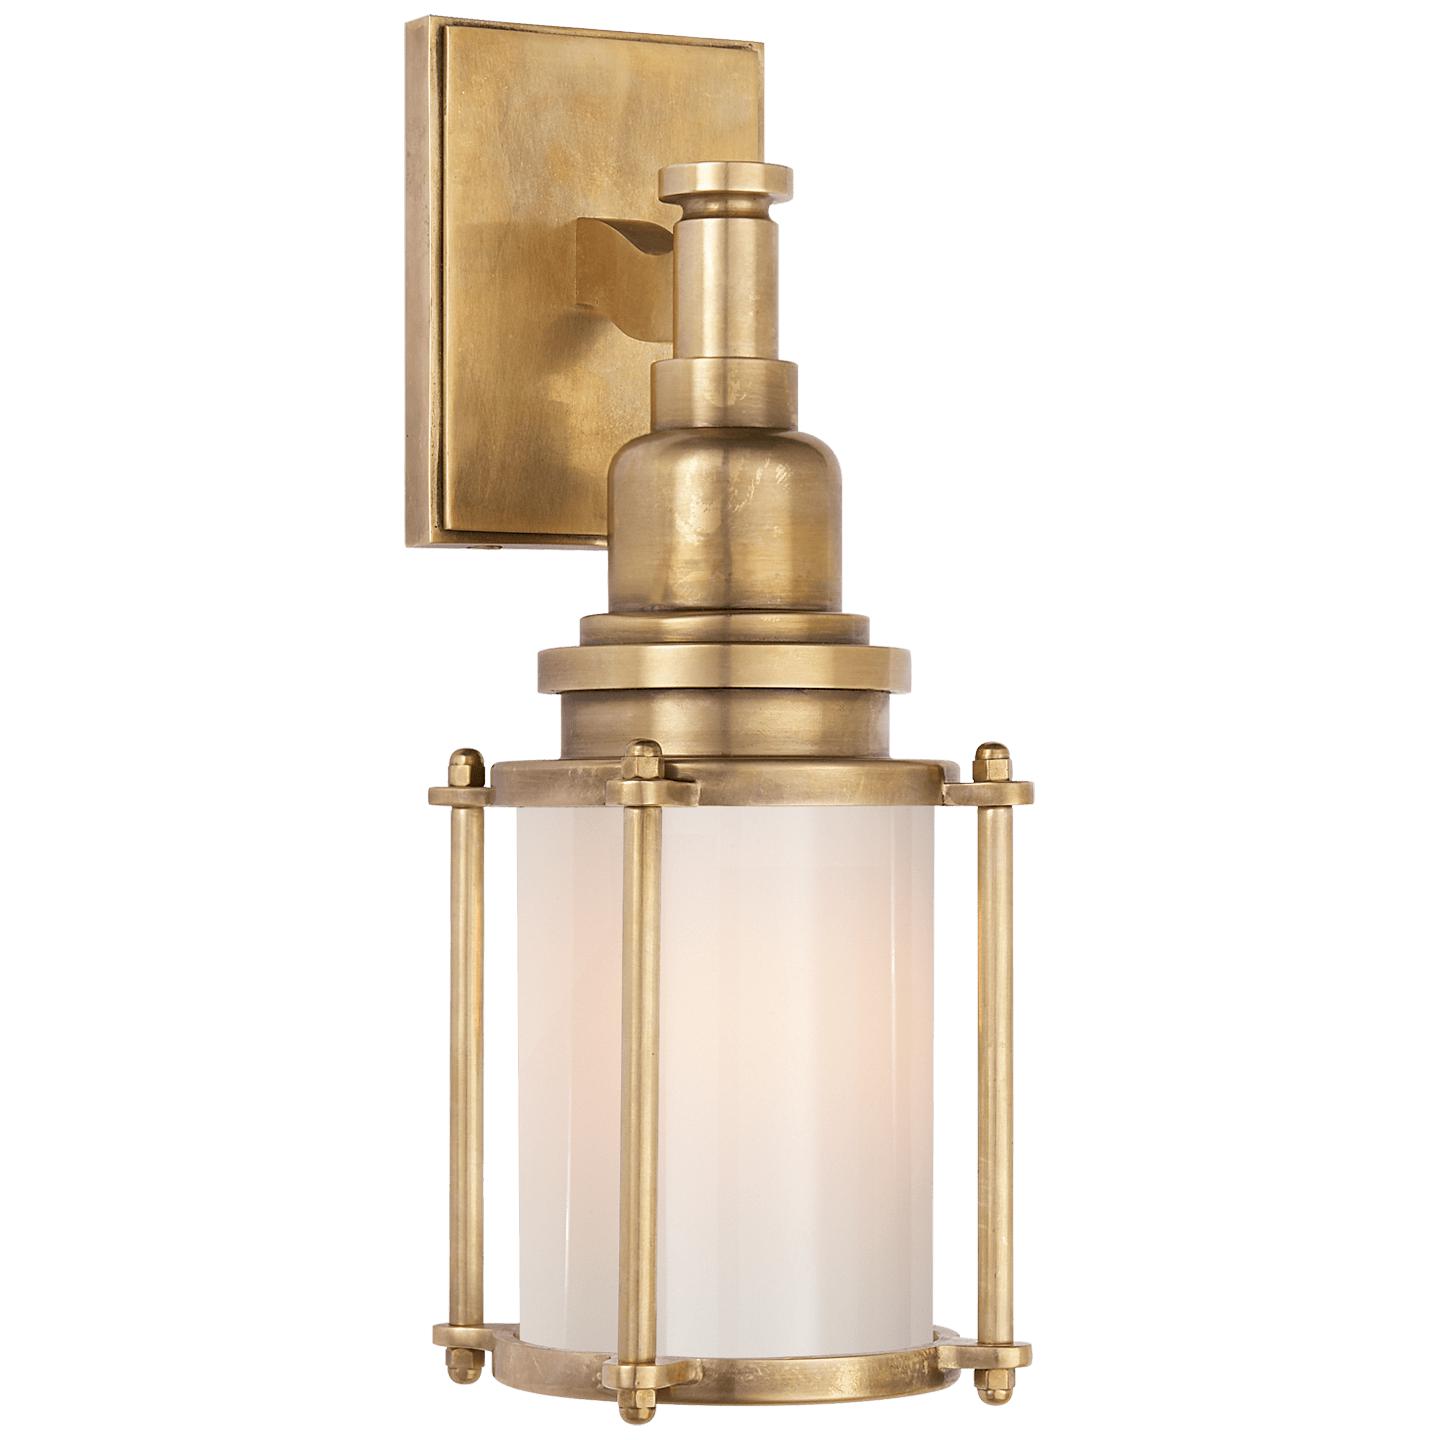 Antique-Burnished Brass White Glass